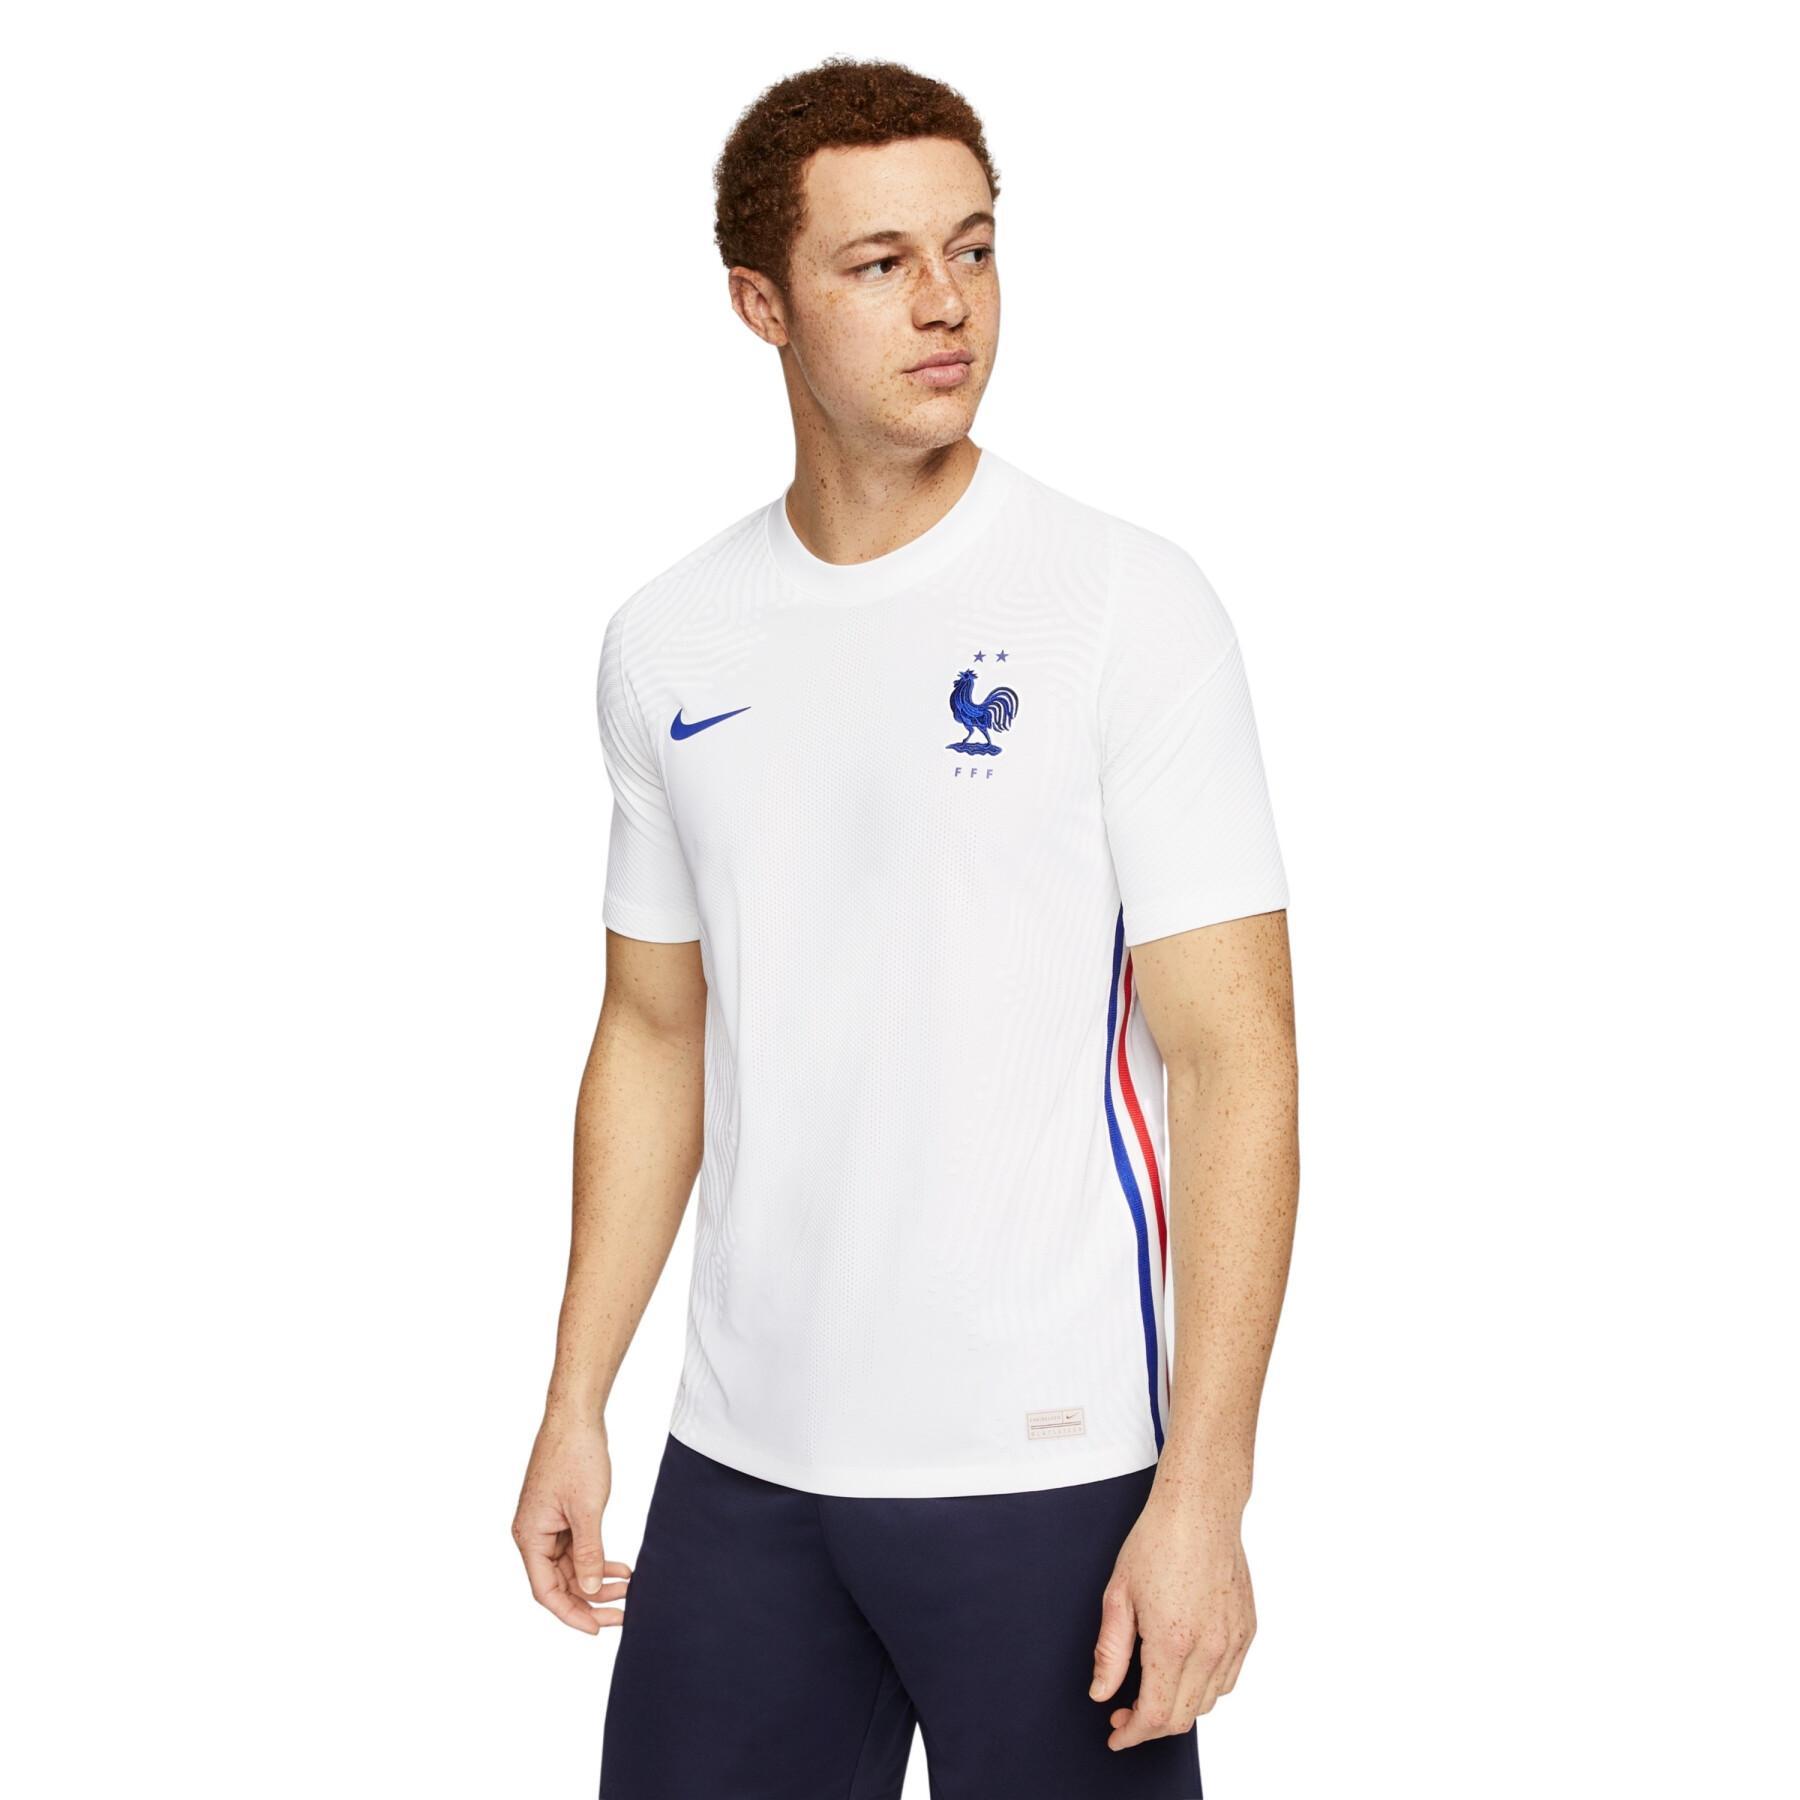 Club Arbitre - Maillot Nike VaporKnit III Manches courtes homme - Blanc